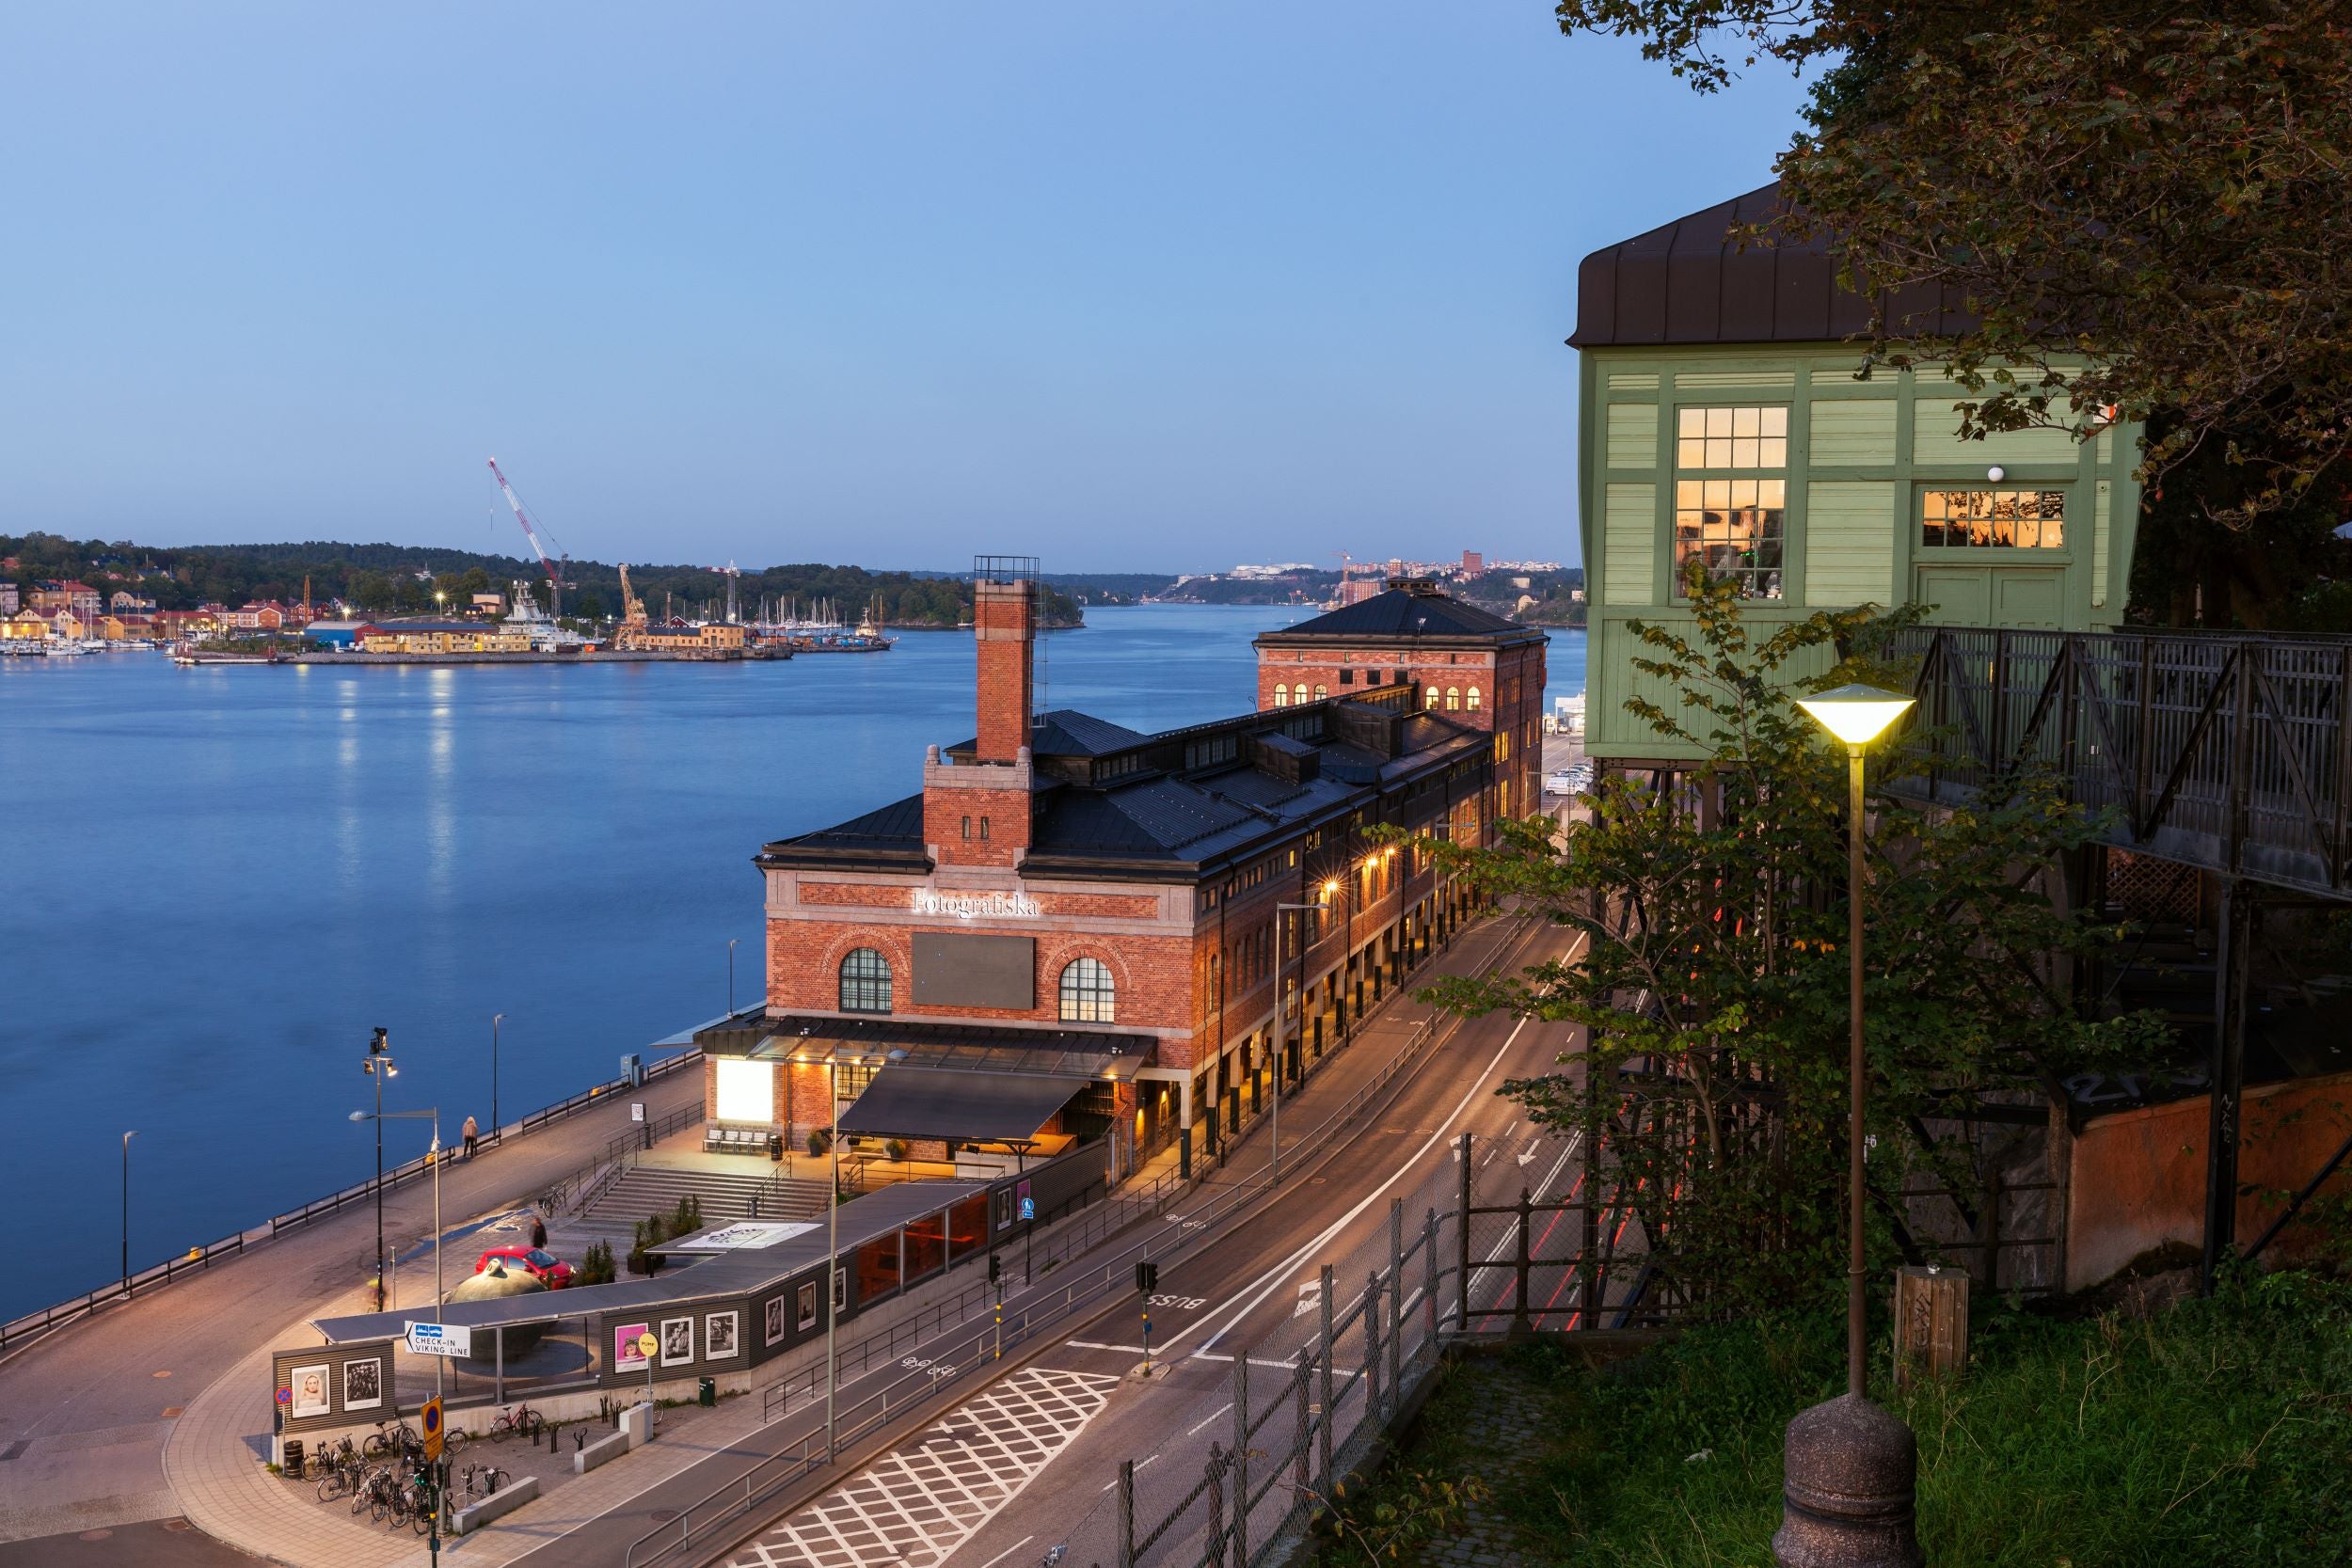 Fotografiska is housed in the old Customs House building on Stockholm’s waterfront